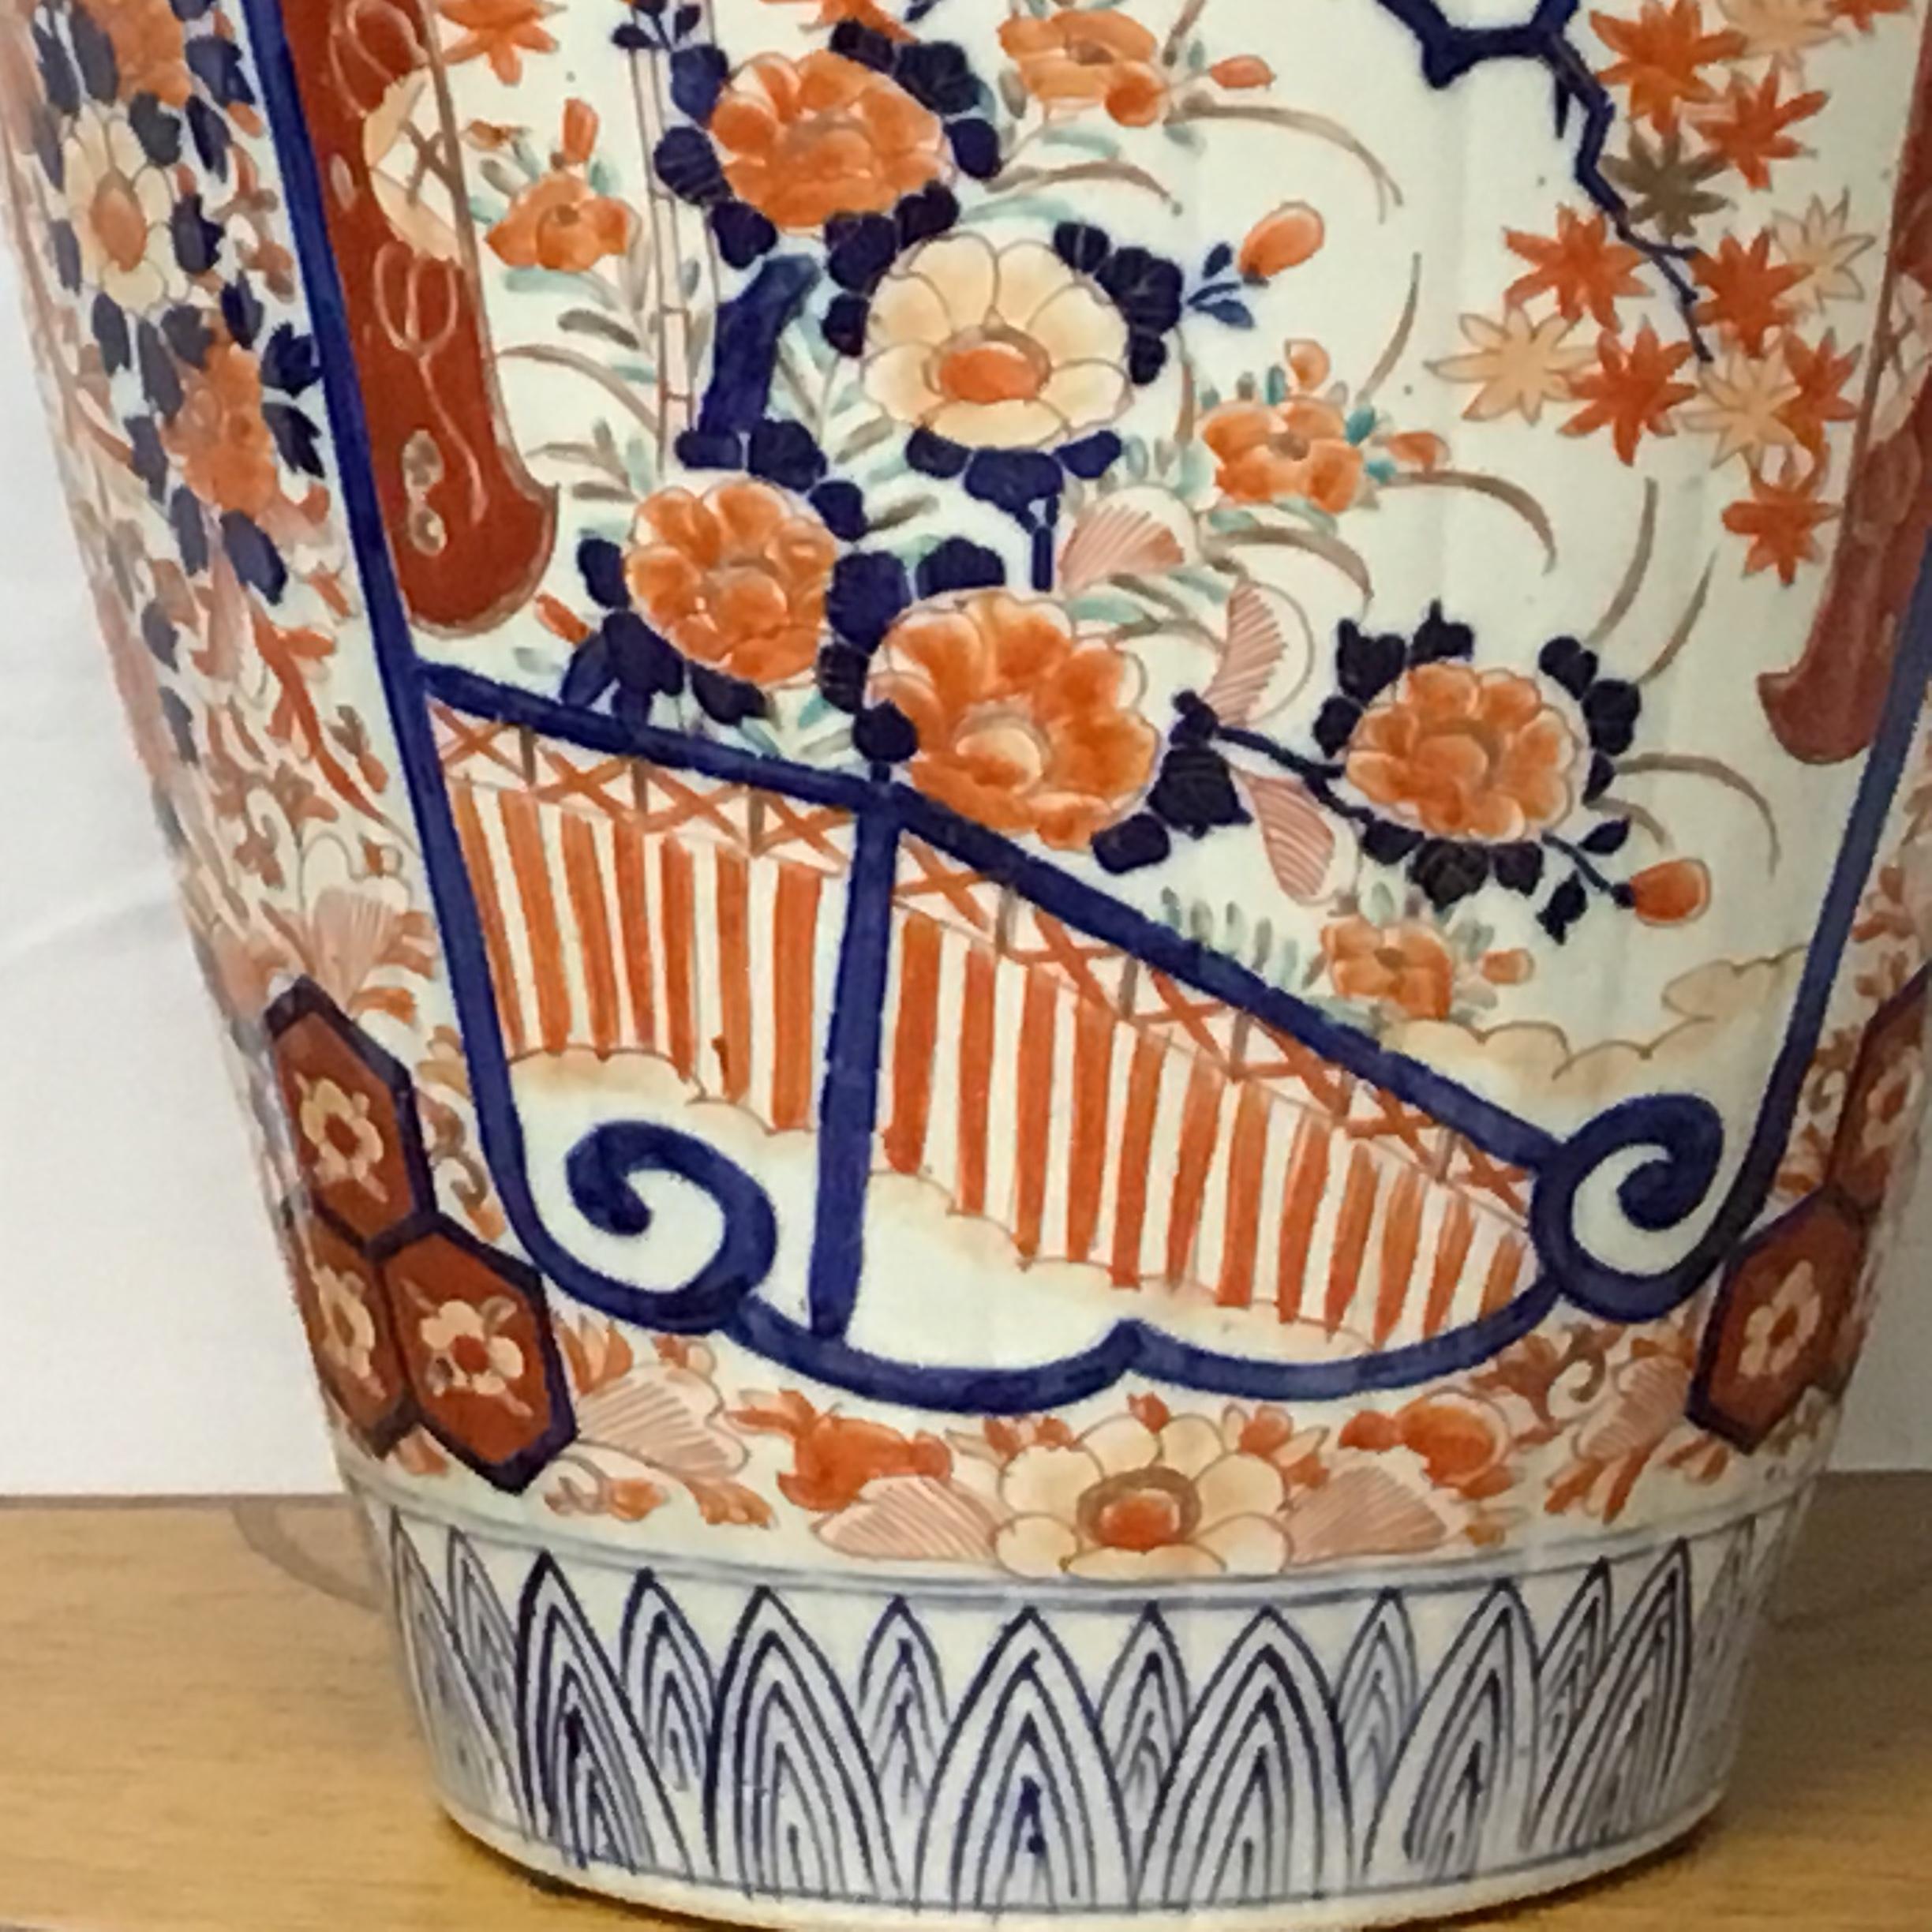 A large scale and very good quality late 19th century Japanese Imari vase with exotic birds, trees and flowers. Wonderful coloring in vibrant hues of blue, red and rust.